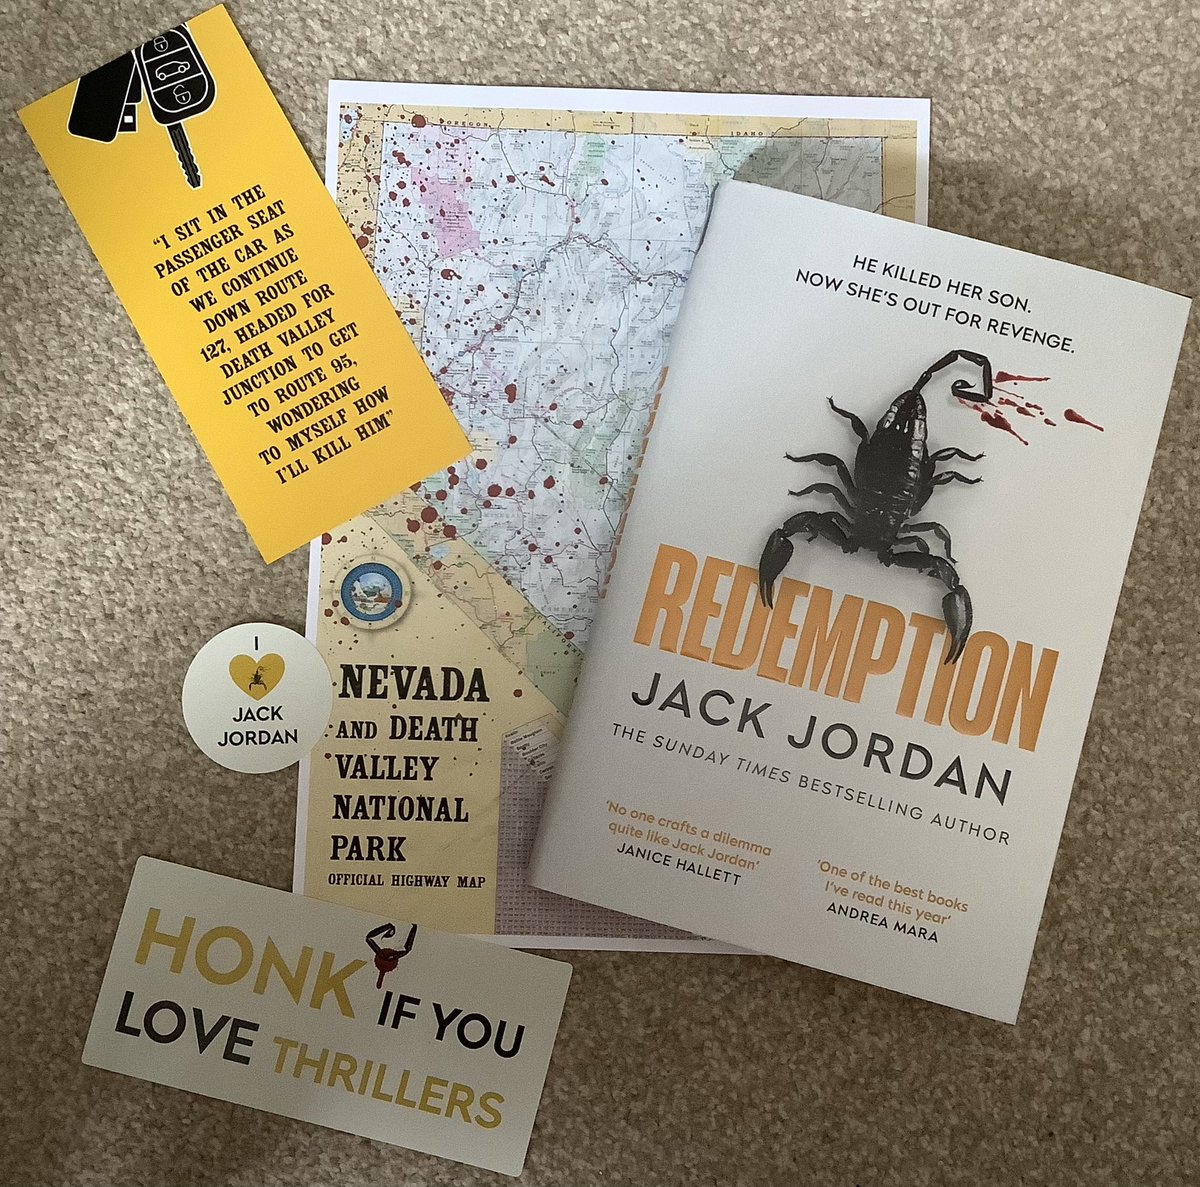 📮BOOK POST📮 Many thanks @likely_suspects @simonschusterUK for my pack of goodies for #Redemption by @JackJordanBooks I’ve been to Death Valley a couple of time so I’m really intrigued 😱 I will be running a giveaway on Publication day 20th June. Don’t miss it